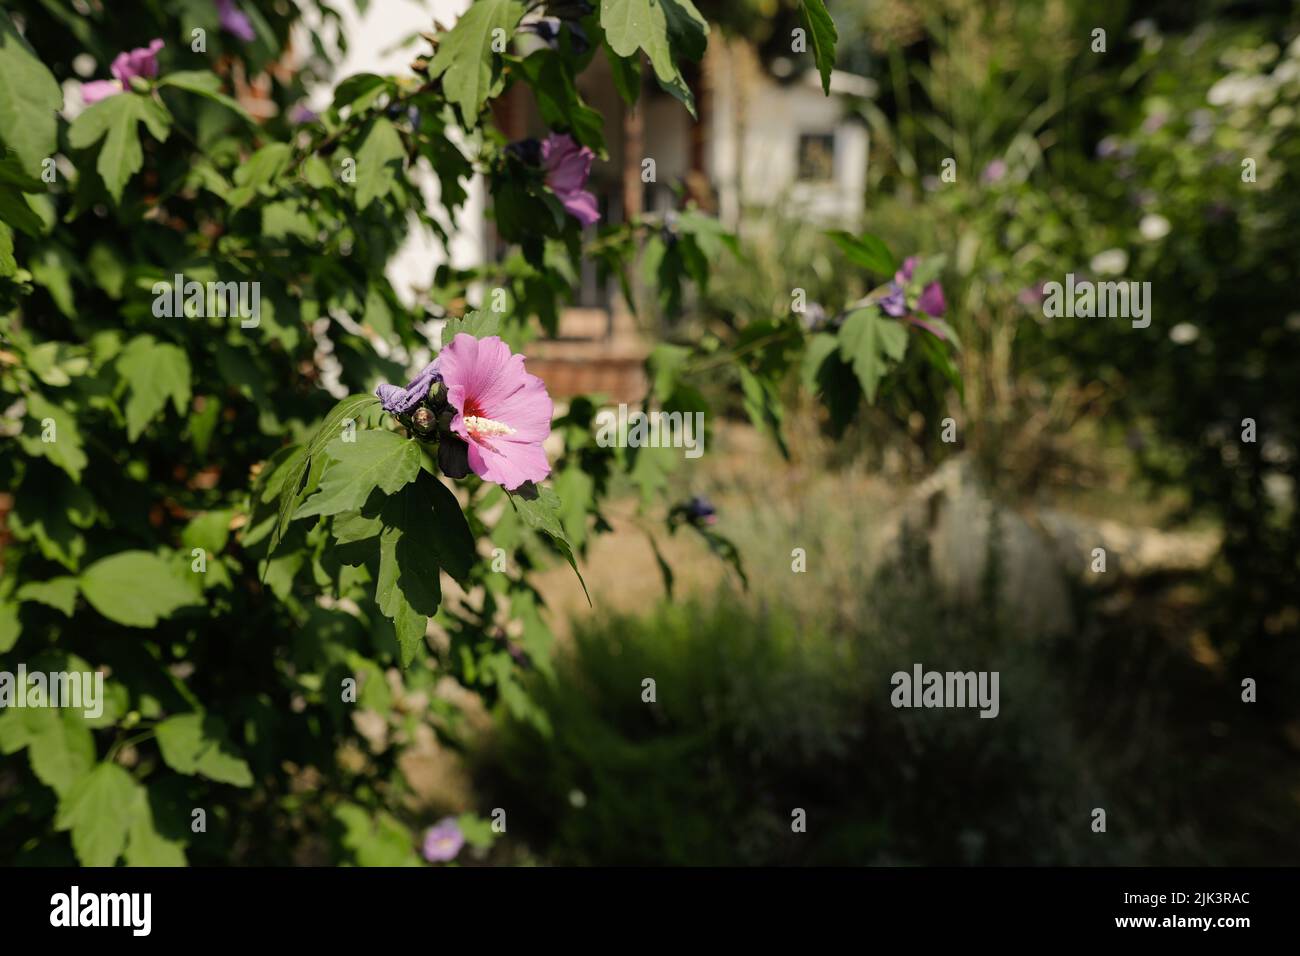 Shallow depth of field (selective focus) details with hollyhocks plant and flowers. Stock Photo